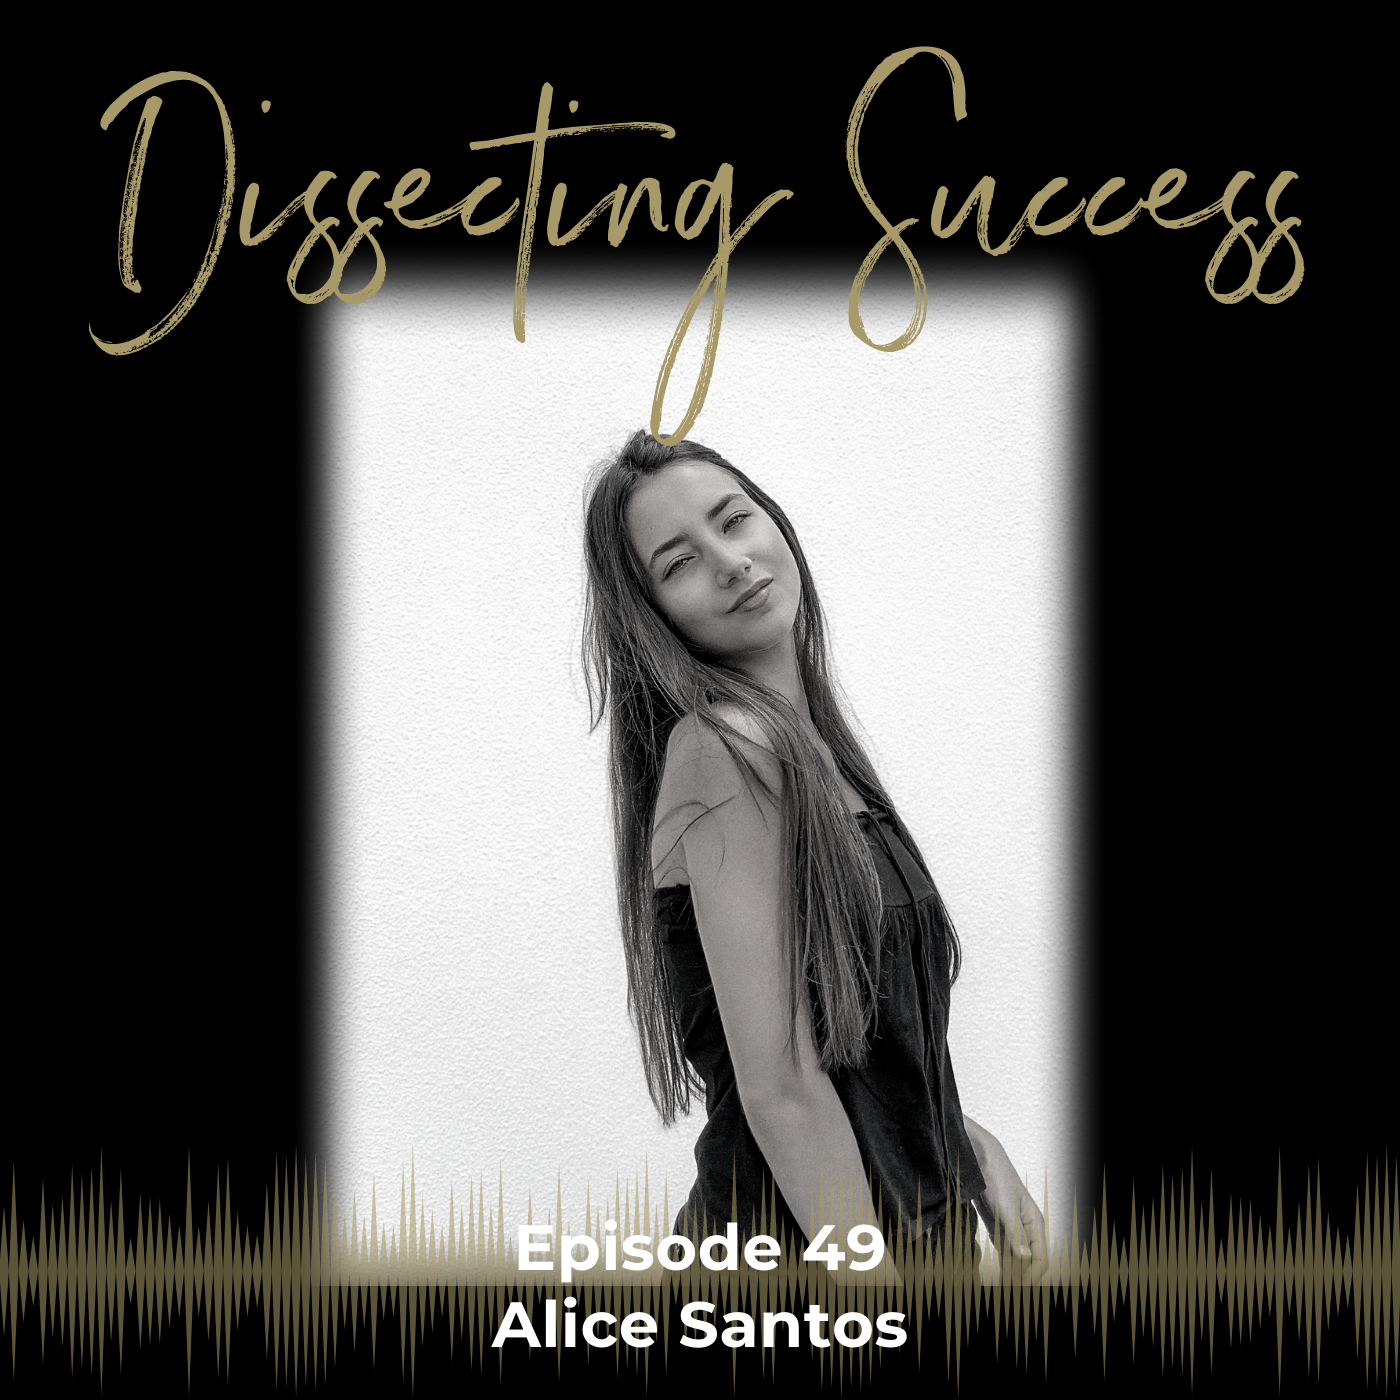 Ep 049: Pay for Play with Alice Santos